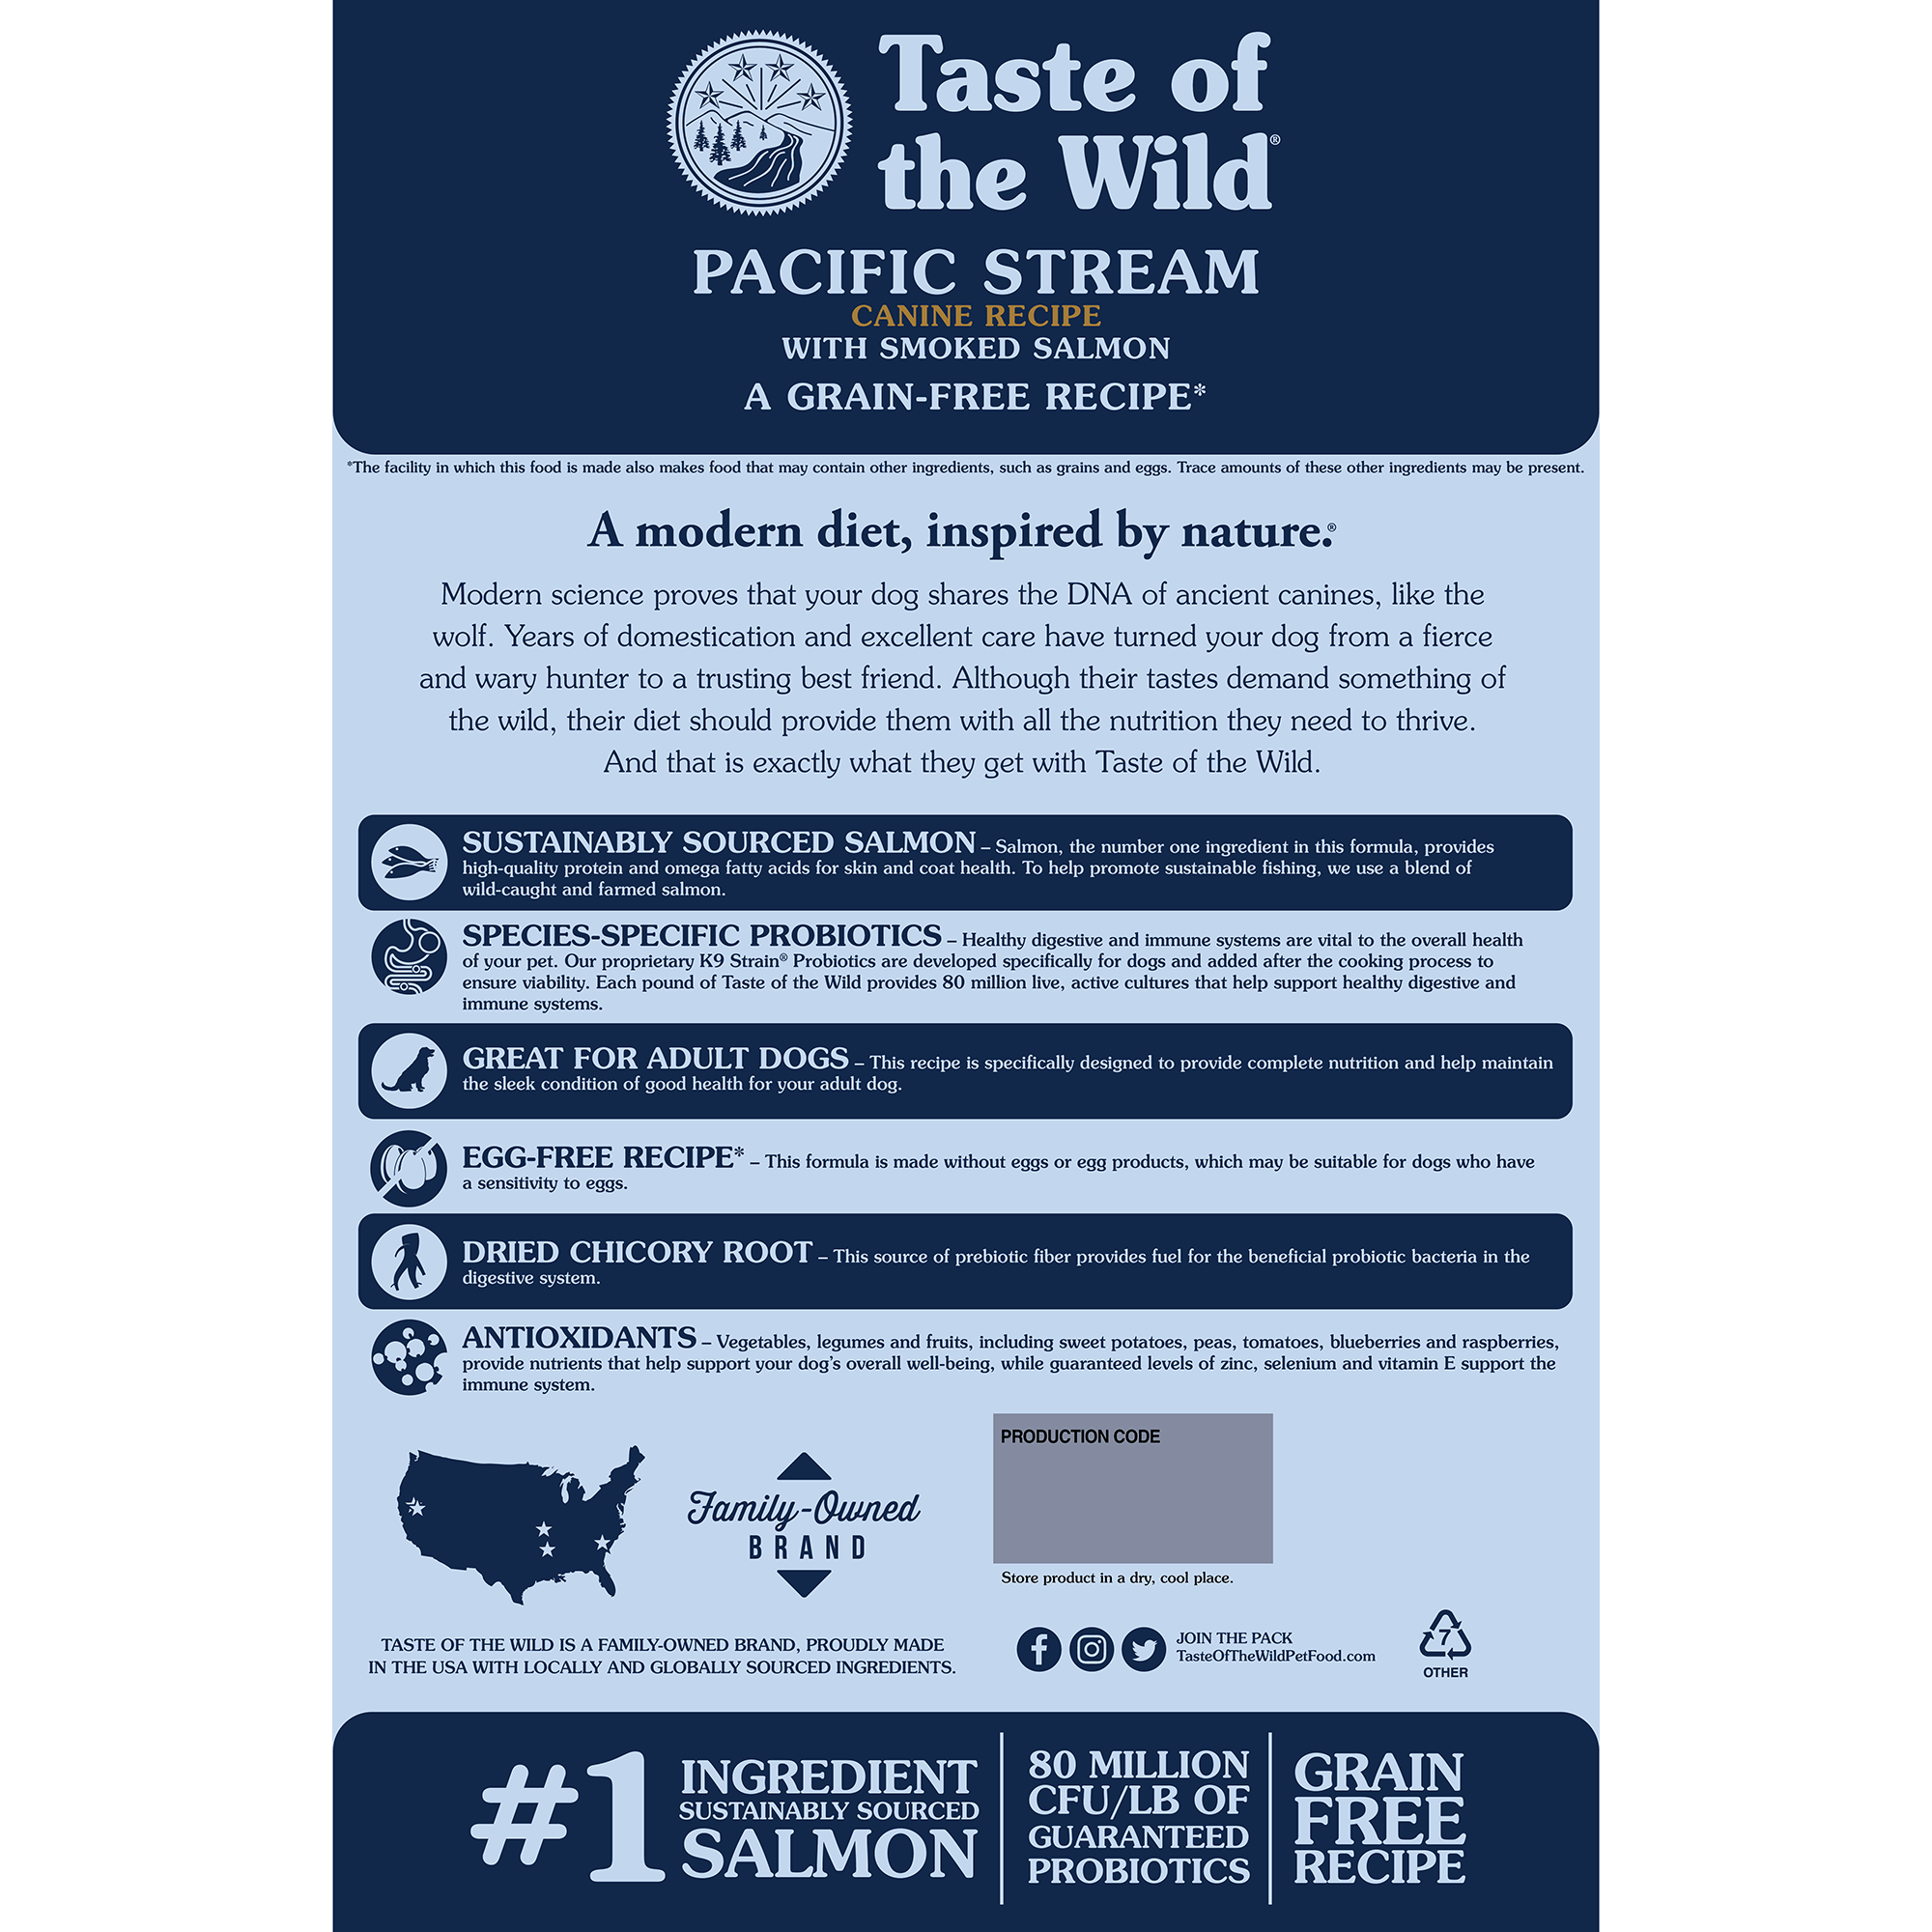 Taste Of The Wild Pacific Stream Grain-Free Dog Food - Mutts & Co.